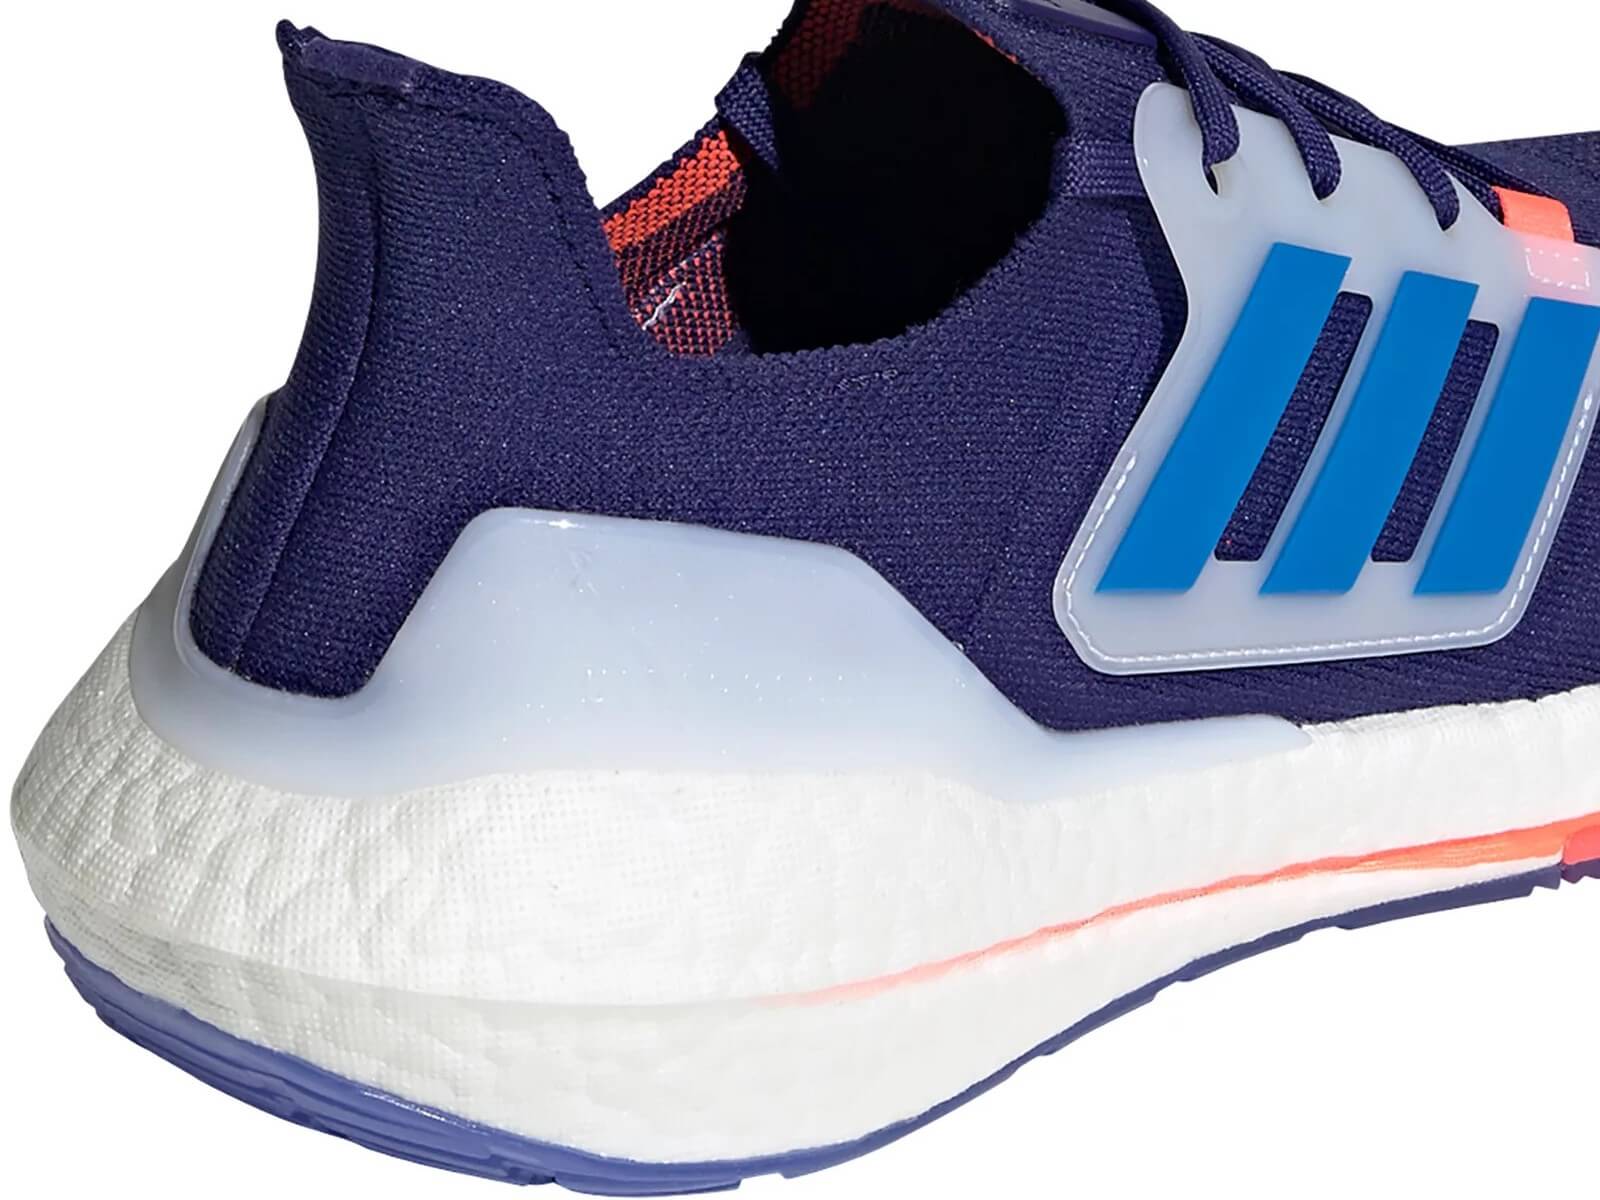 Rear view of the sidewalls on the midsole of the ultraboost 22